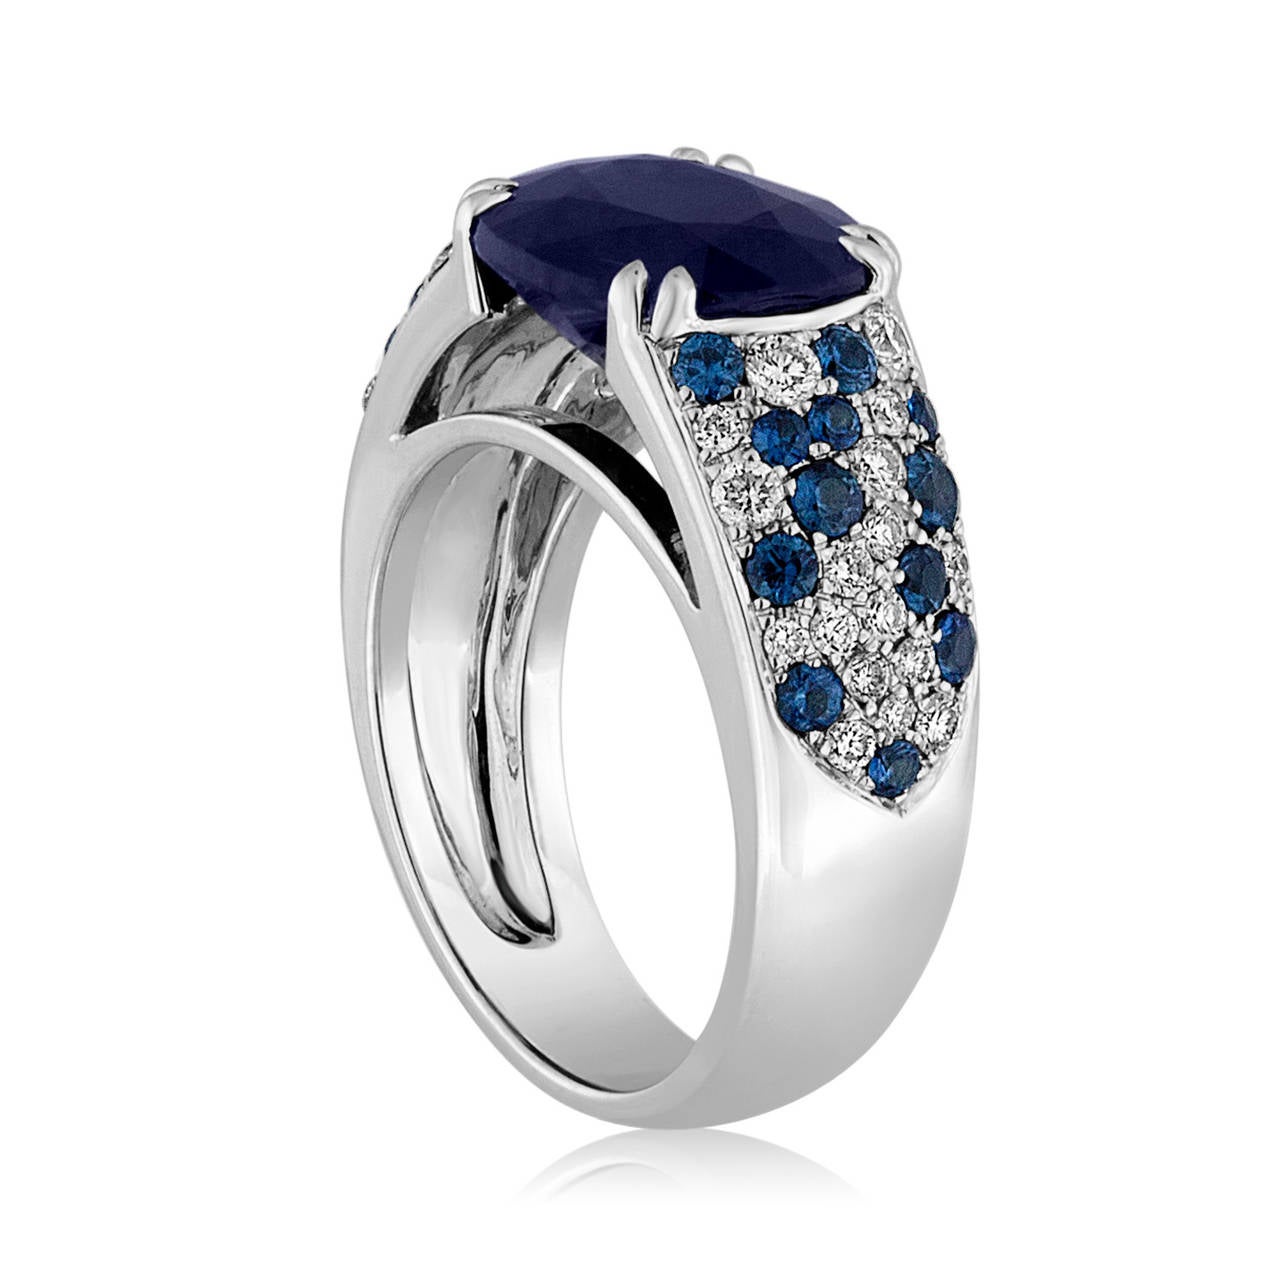 Mauboussin Nuit d'Amour Ring Sapphire, Diamond and Gold Ring
18K White Gold
4.20ct middle sapphire stone
1.00ct diamonds F/G VS/SI
1.50ct small sapphires
The ring is a size 5.25